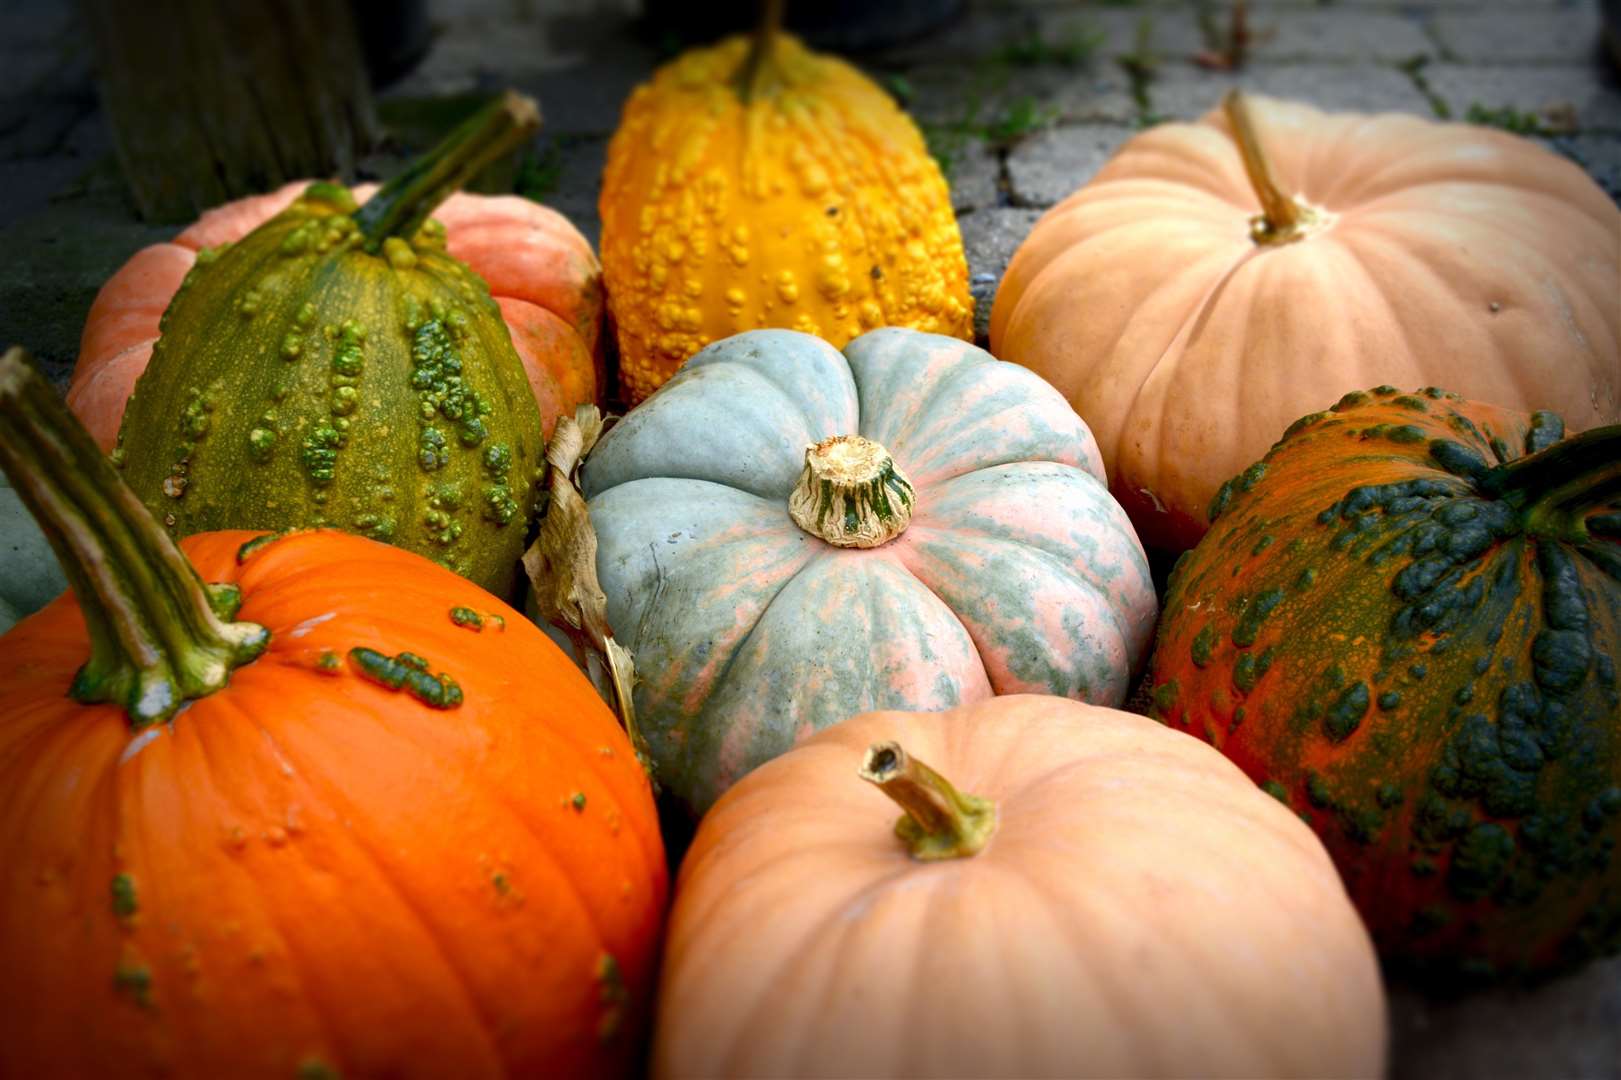 Pick up a pumpkin in time for Halloween